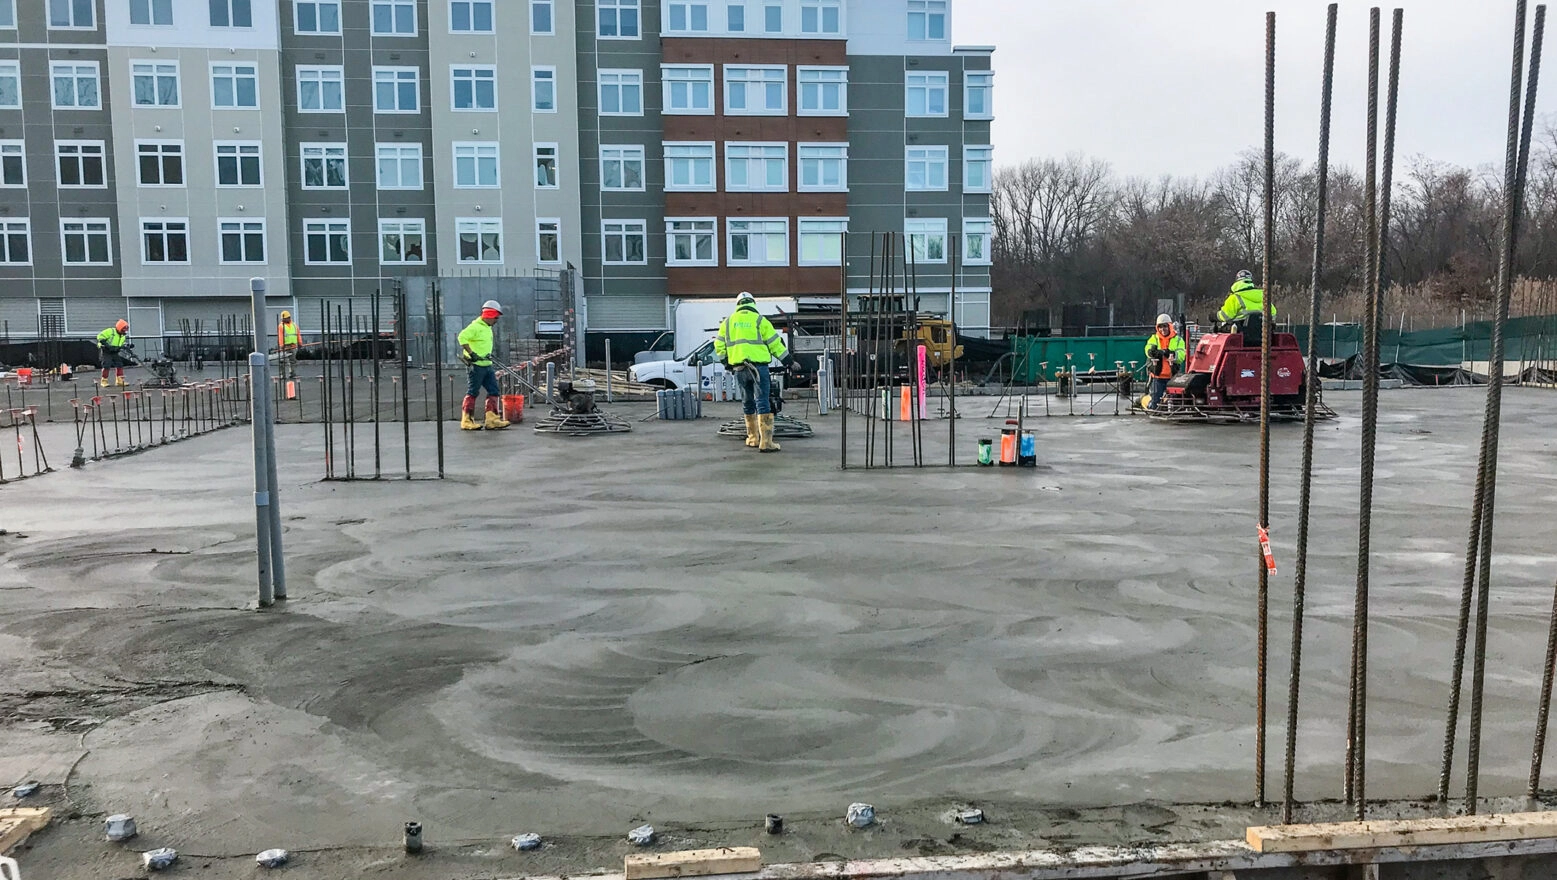 Dex by Terra workers performing Concrete Finishing on concrete slab in Massachusetts.